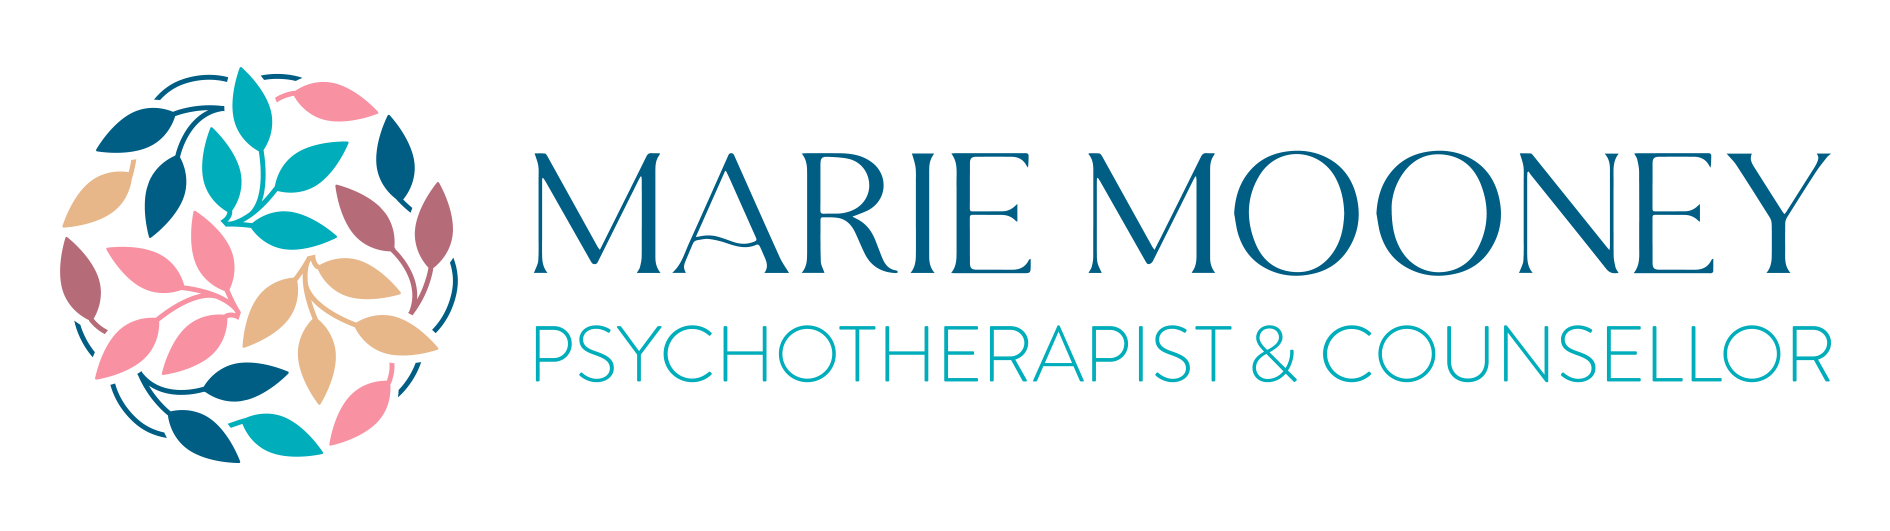 Marie Mooney | Psychotherapist & Counsellor